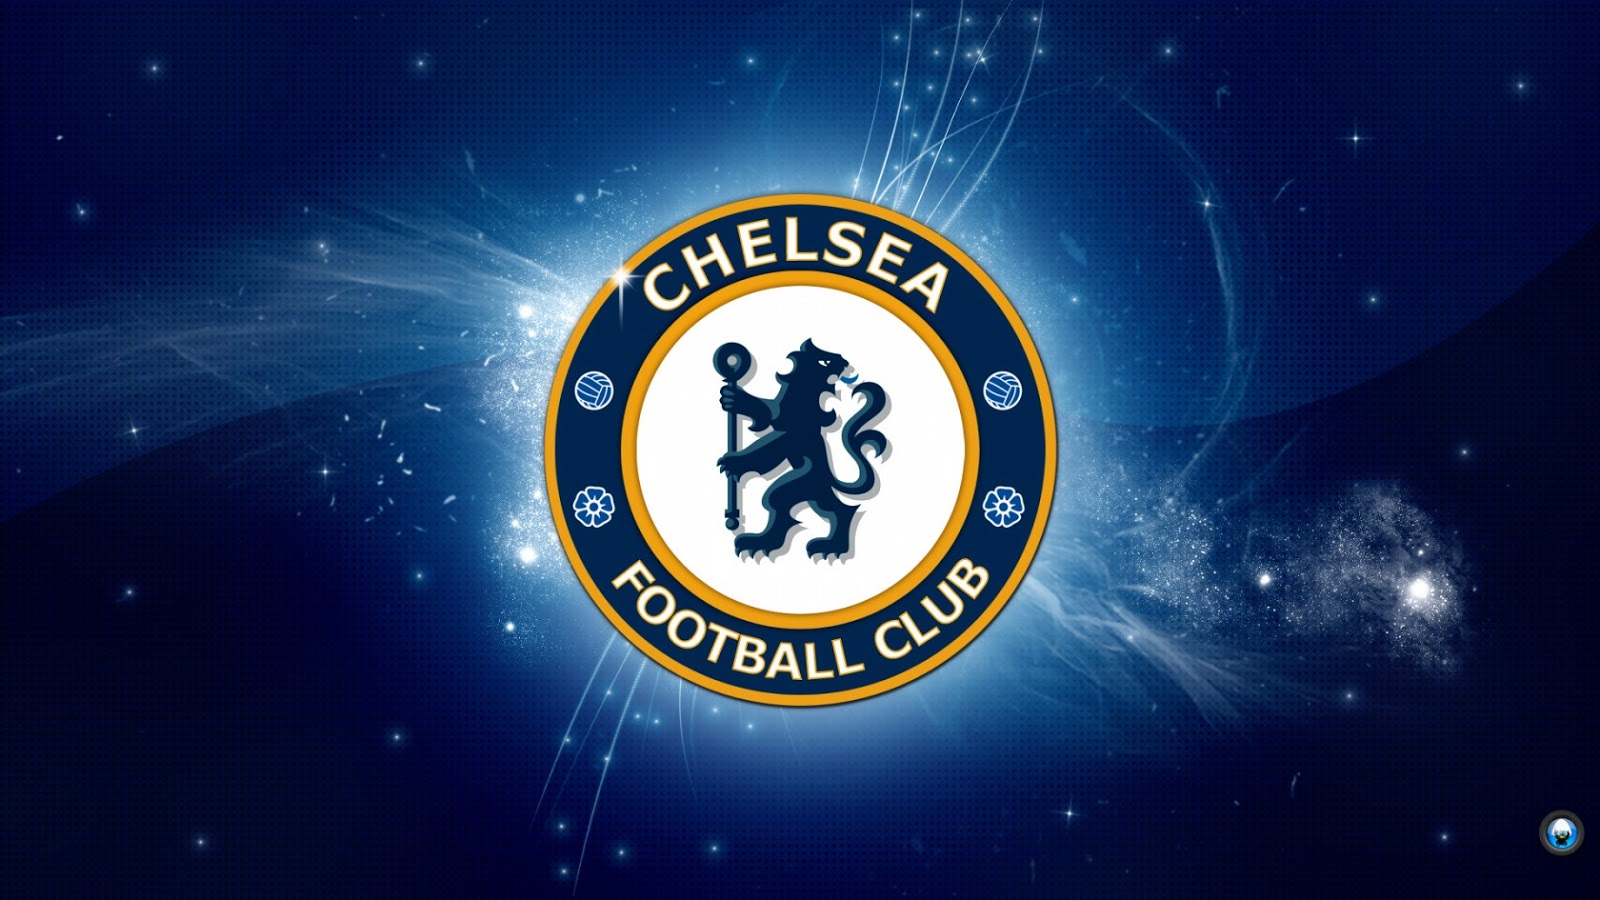 All Wallpapers: Chelsea FC Logo Wallpapers 2013